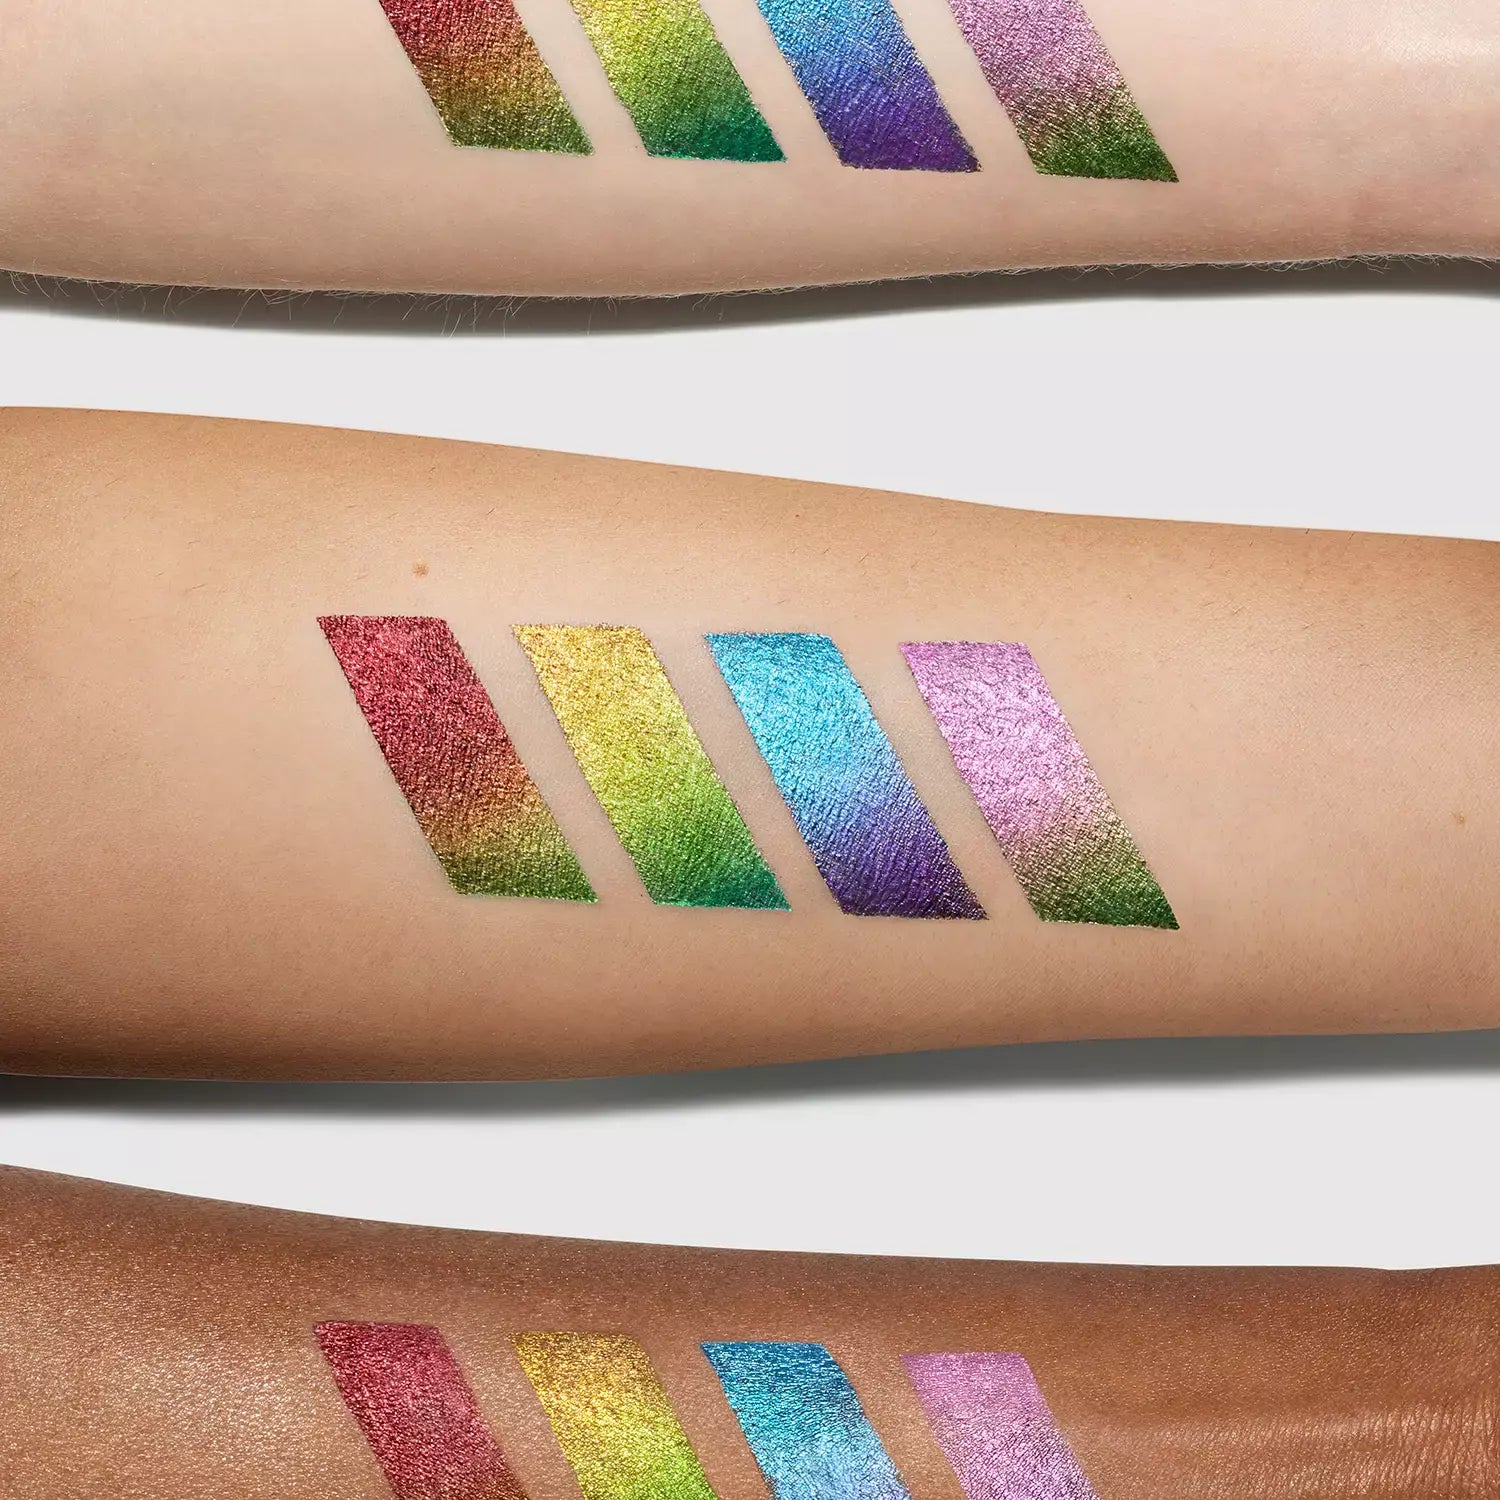 Hypnotic Color Cream multichrome eyeshadow arm swatches in four colors: Afterglow, Prism, Moondance and Cosmos.